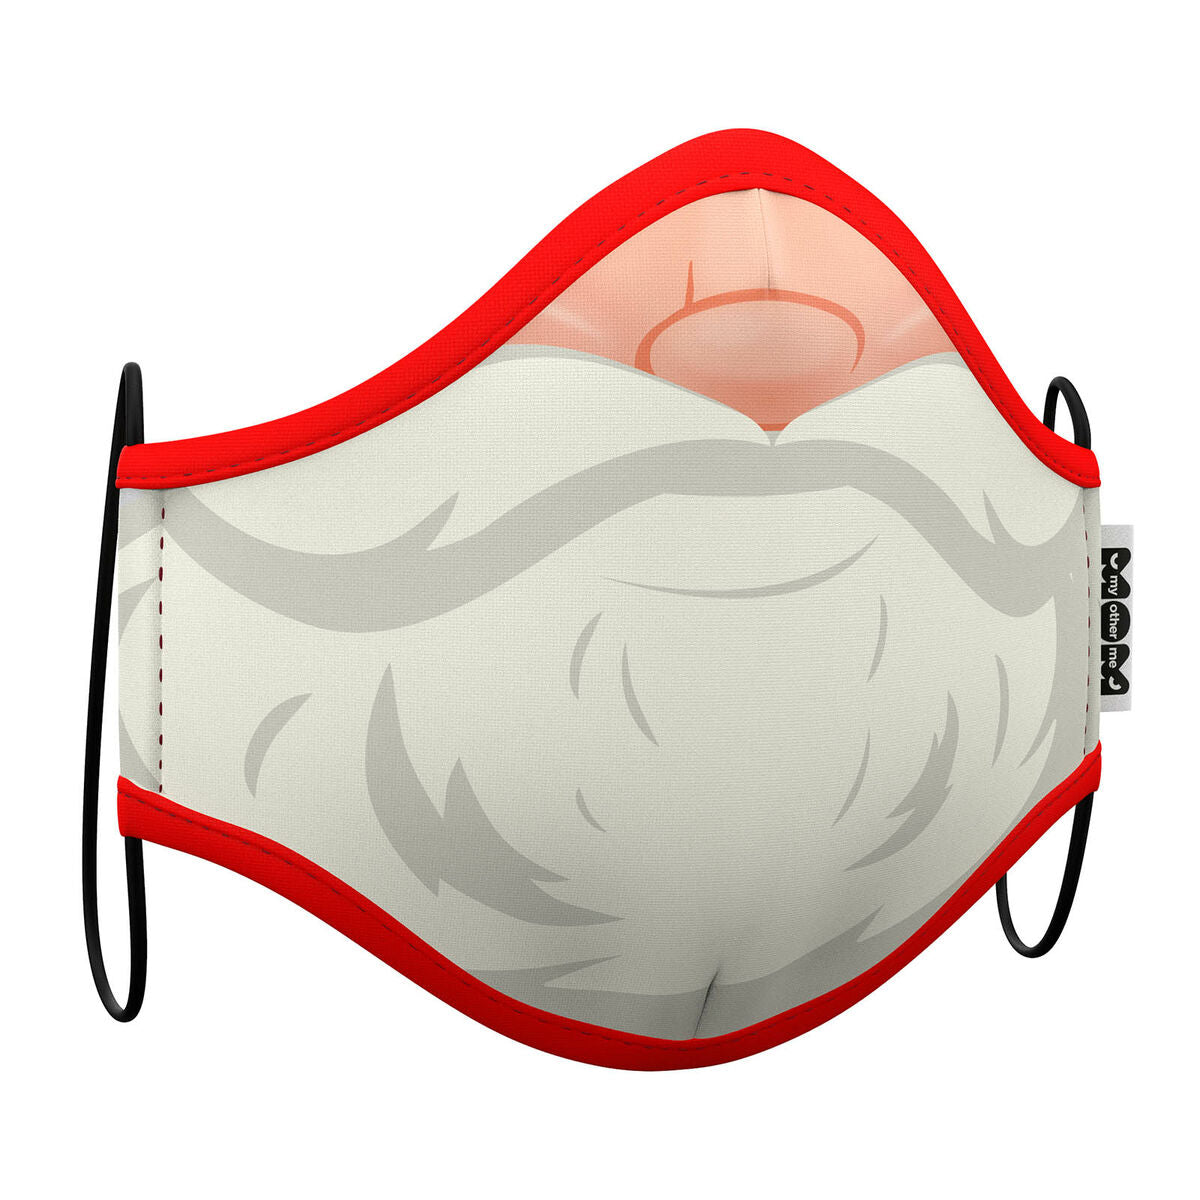 Hygienic Face Mask My Other Me Father Christmas Adults - Calm Beauty IE